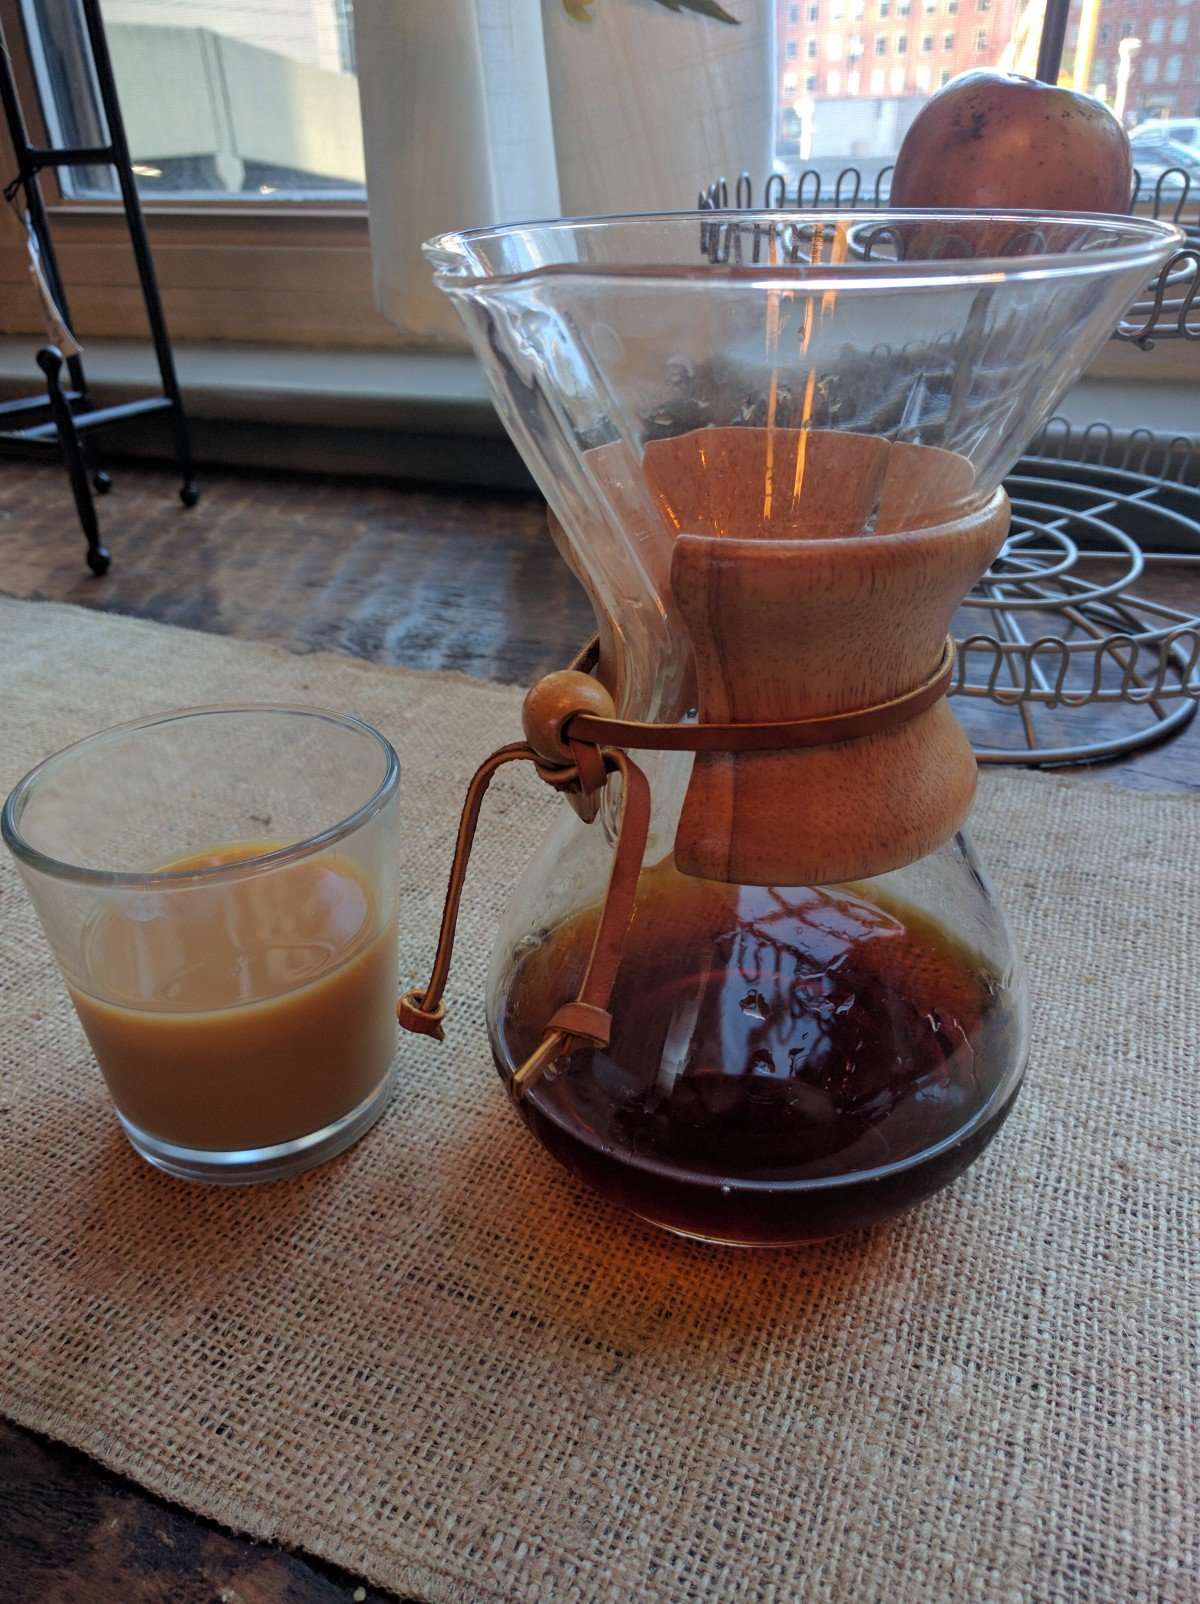 How to make cold brewed coffee using a Chemex